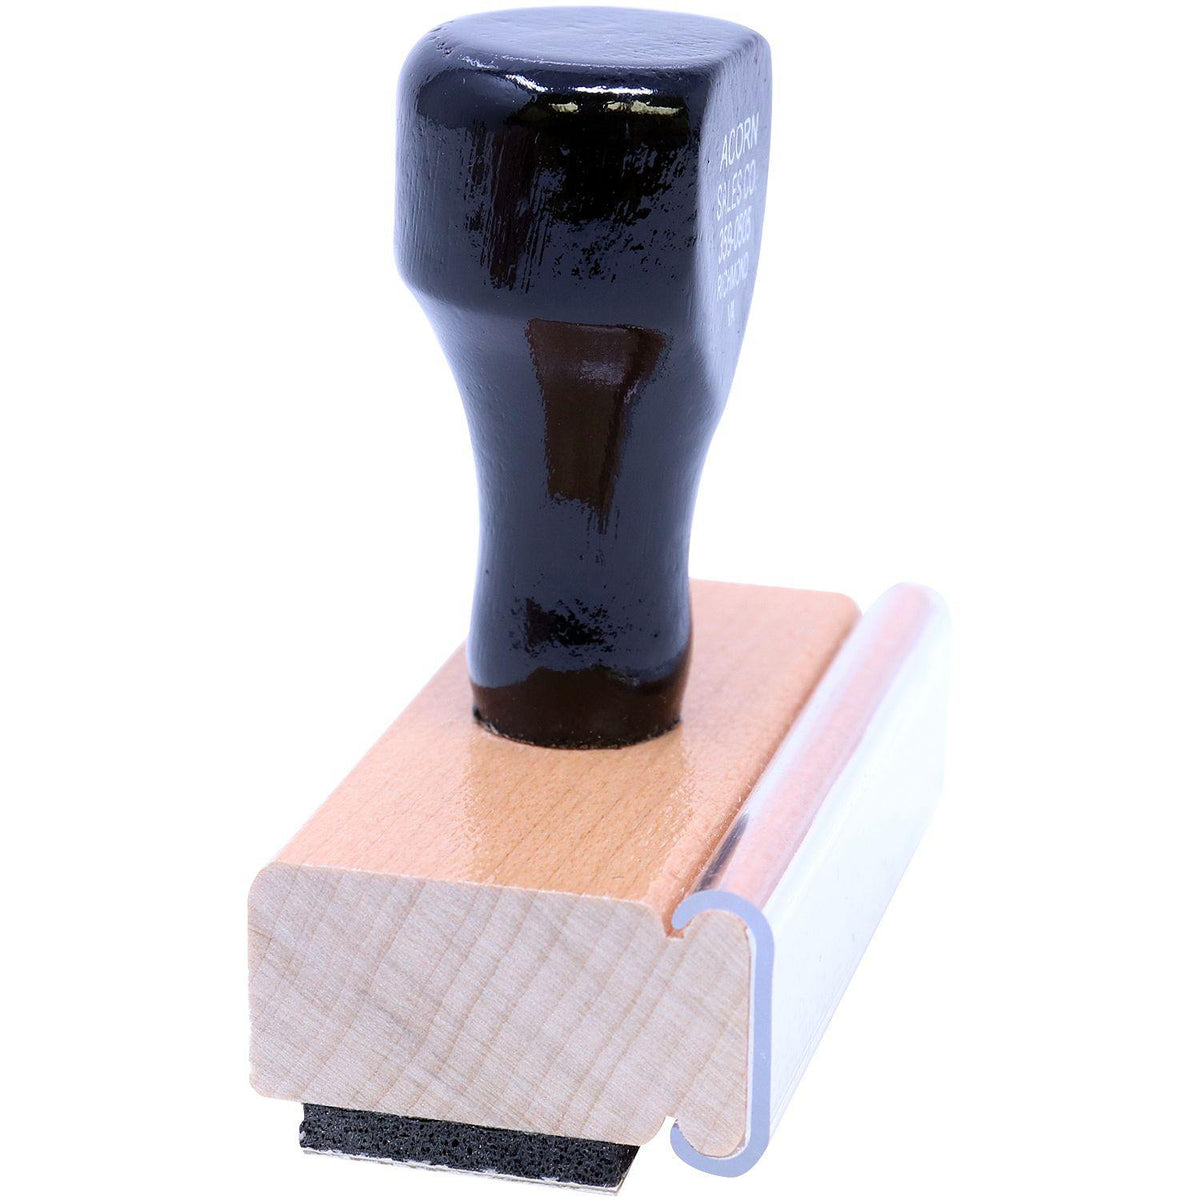 Side View of Your Insurance has Paid their Portion Rubber Stamp at an Angle